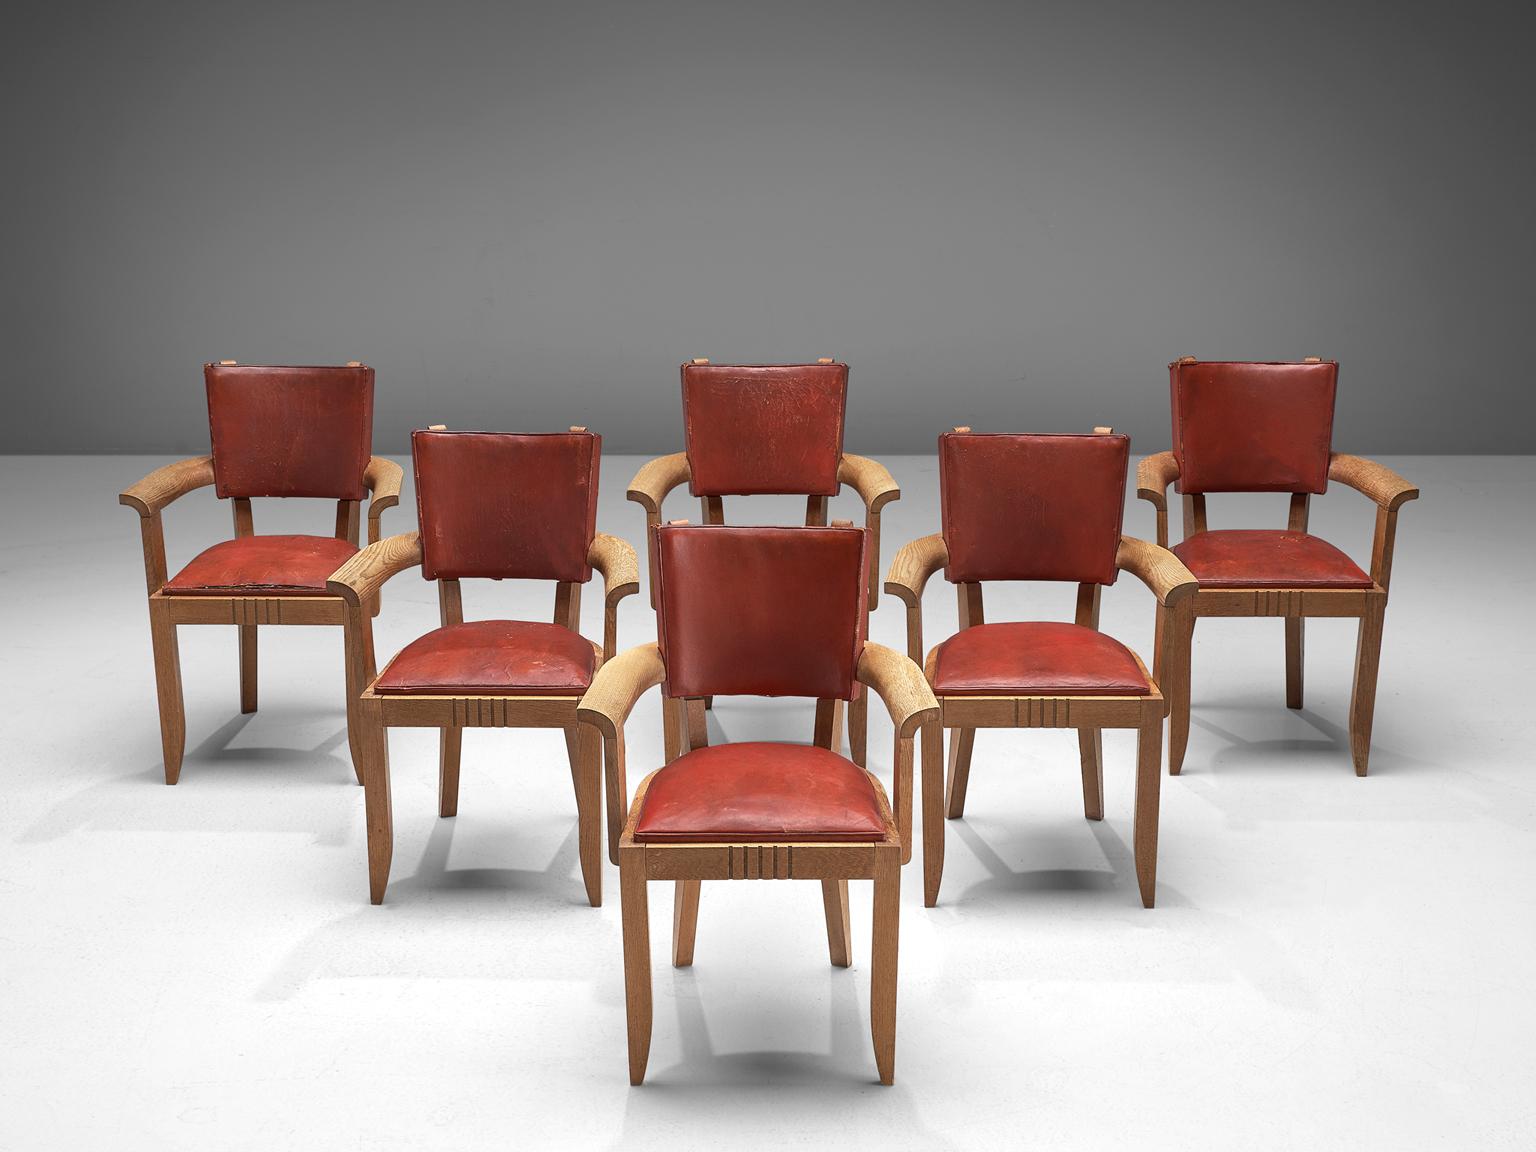 Charles Dudouyt, set of 6 armchairs, leather and oak, France, 1930s

This set of six Art Deco dining chairs is upholstered with deep red leather that has patinated over time. The frame is made of solid oak and features tapered, carved legs. The